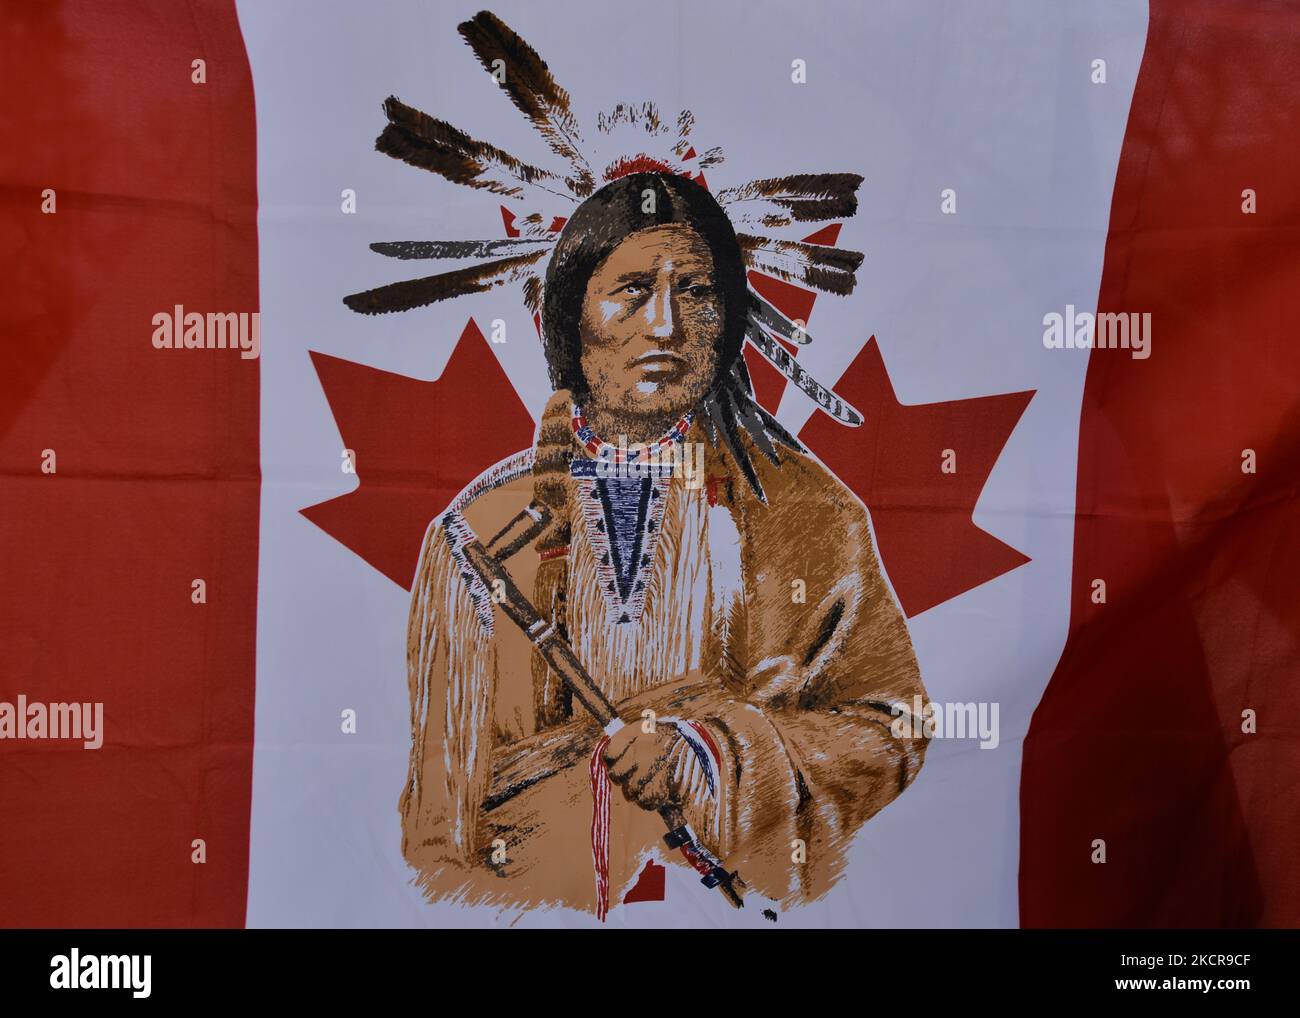 A modified Canadian flag with an image of a First Nations member in the center, seen inside a 'sit-in' camp that consists of five teepees, a dozen tents and a sacred fire, set in the Alberta Legislative Grounds. About 50 people have been in the camp that began in early October. Their aim is to raise awareness of issues facing First Nations communities in Alberta and Canada, including the claim of territory, and the issue of unmarked graves of indigenous children. On Friday, 22 August 2021, in Alberta Legislature Grounds, Edmonton, Alberta, Canada. (Photo by Artur Widak/NurPhoto) Stock Photo